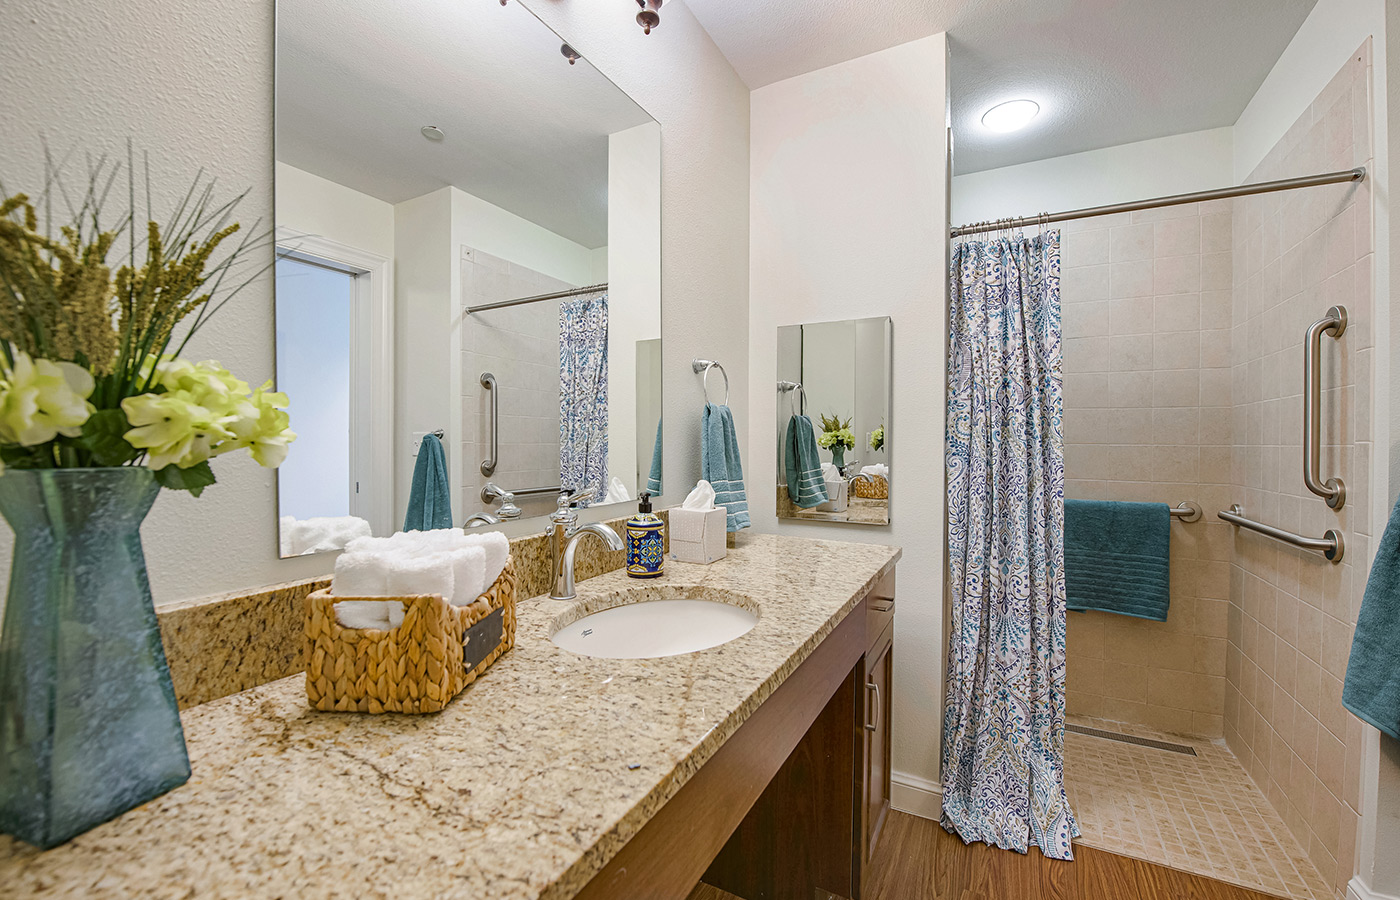 A bathroom in an apartment at The Watermark at Trinity.
